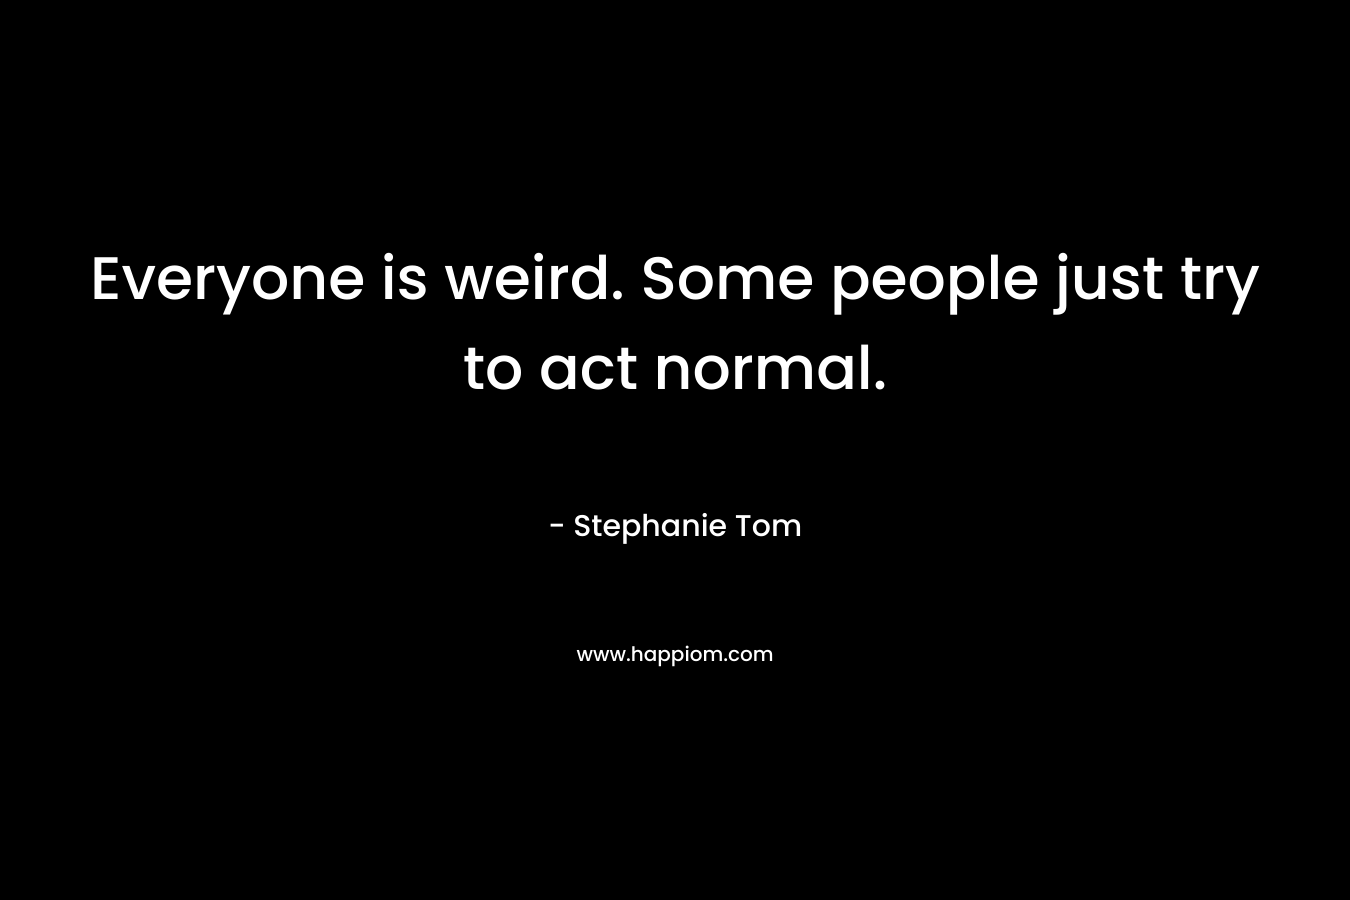 Everyone is weird. Some people just try to act normal. – Stephanie Tom